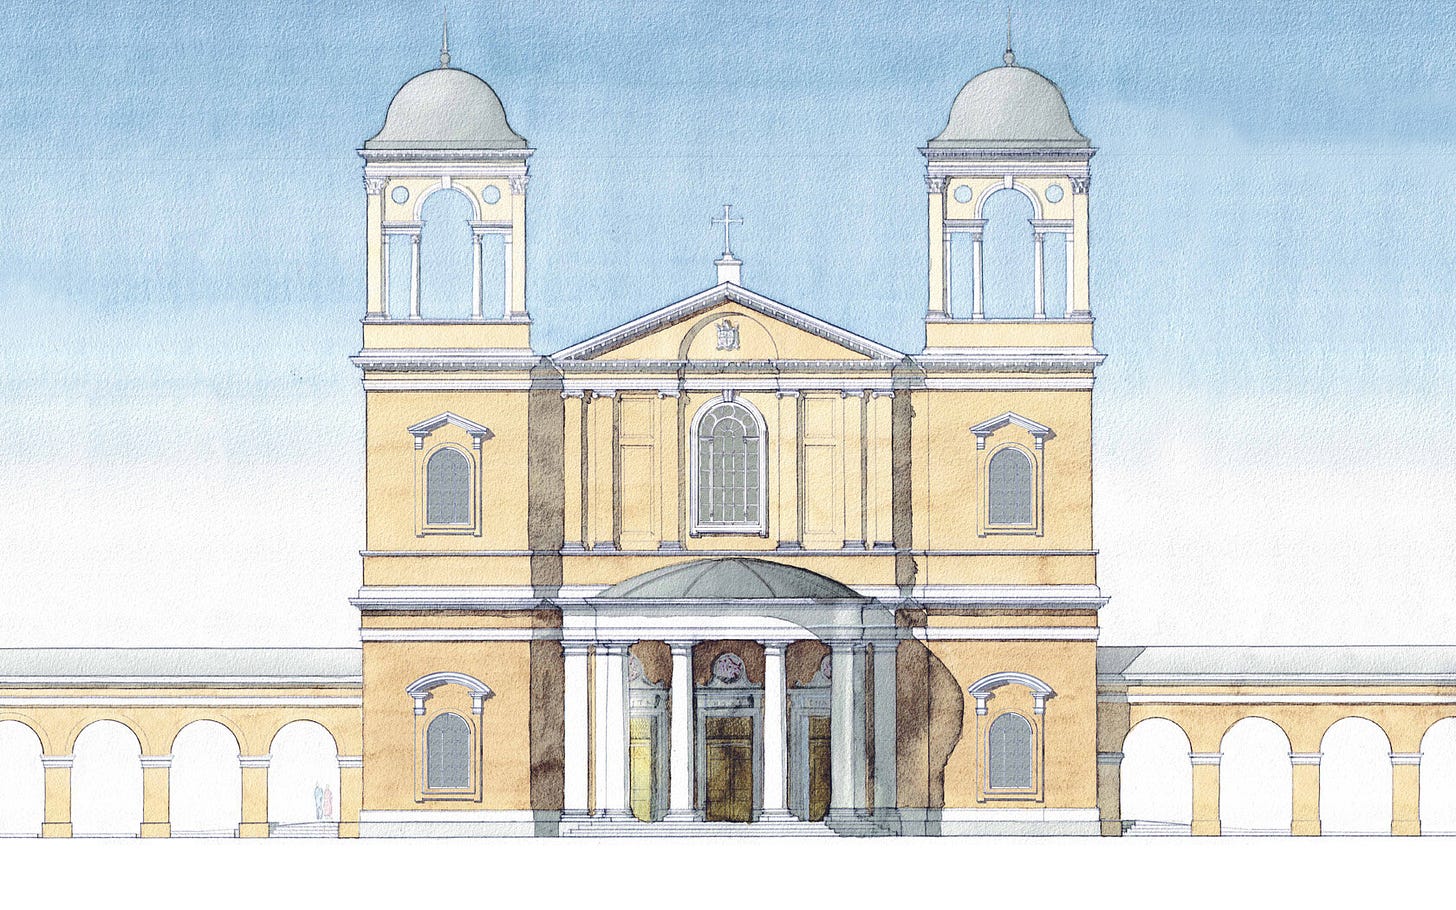 Contrast the architect's sketches and renderings for Holy Cross Church with these beautiful renderings of the design for Christ Chapel, Hillsdale, Michigan by classical architect Duncan Stroik.